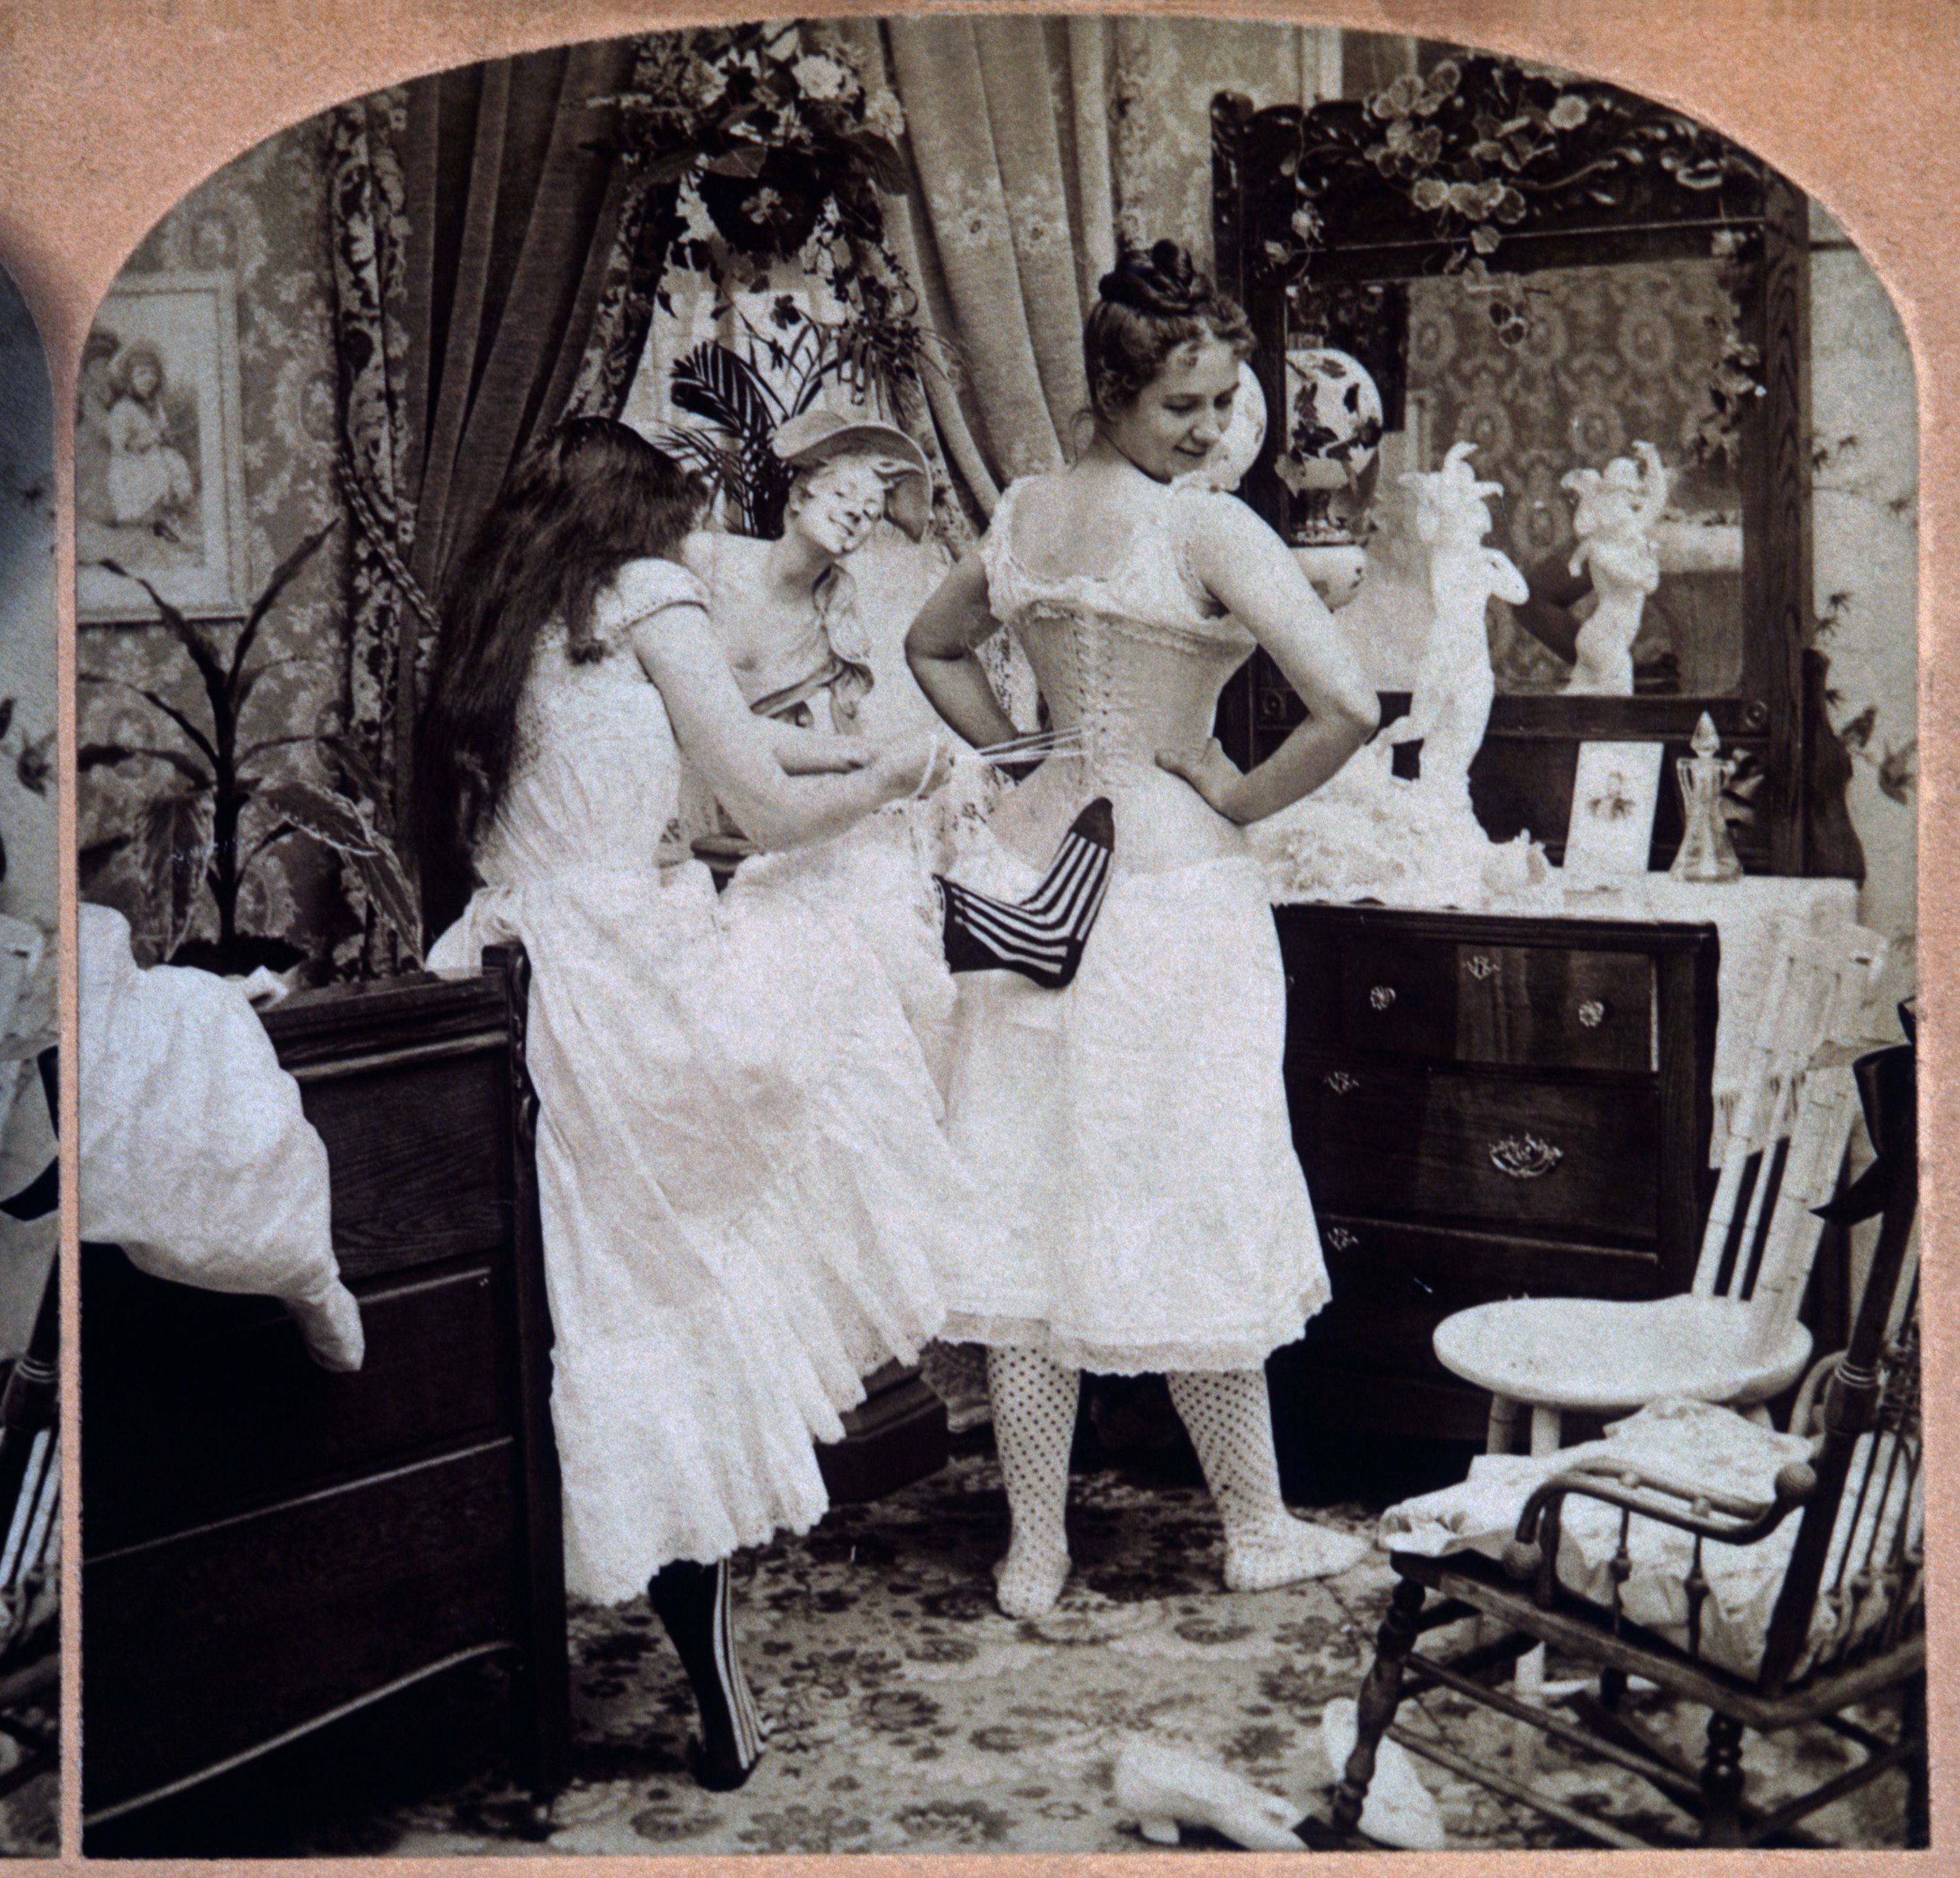 18 Vintage Girdle High Res Illustrations - Getty Images